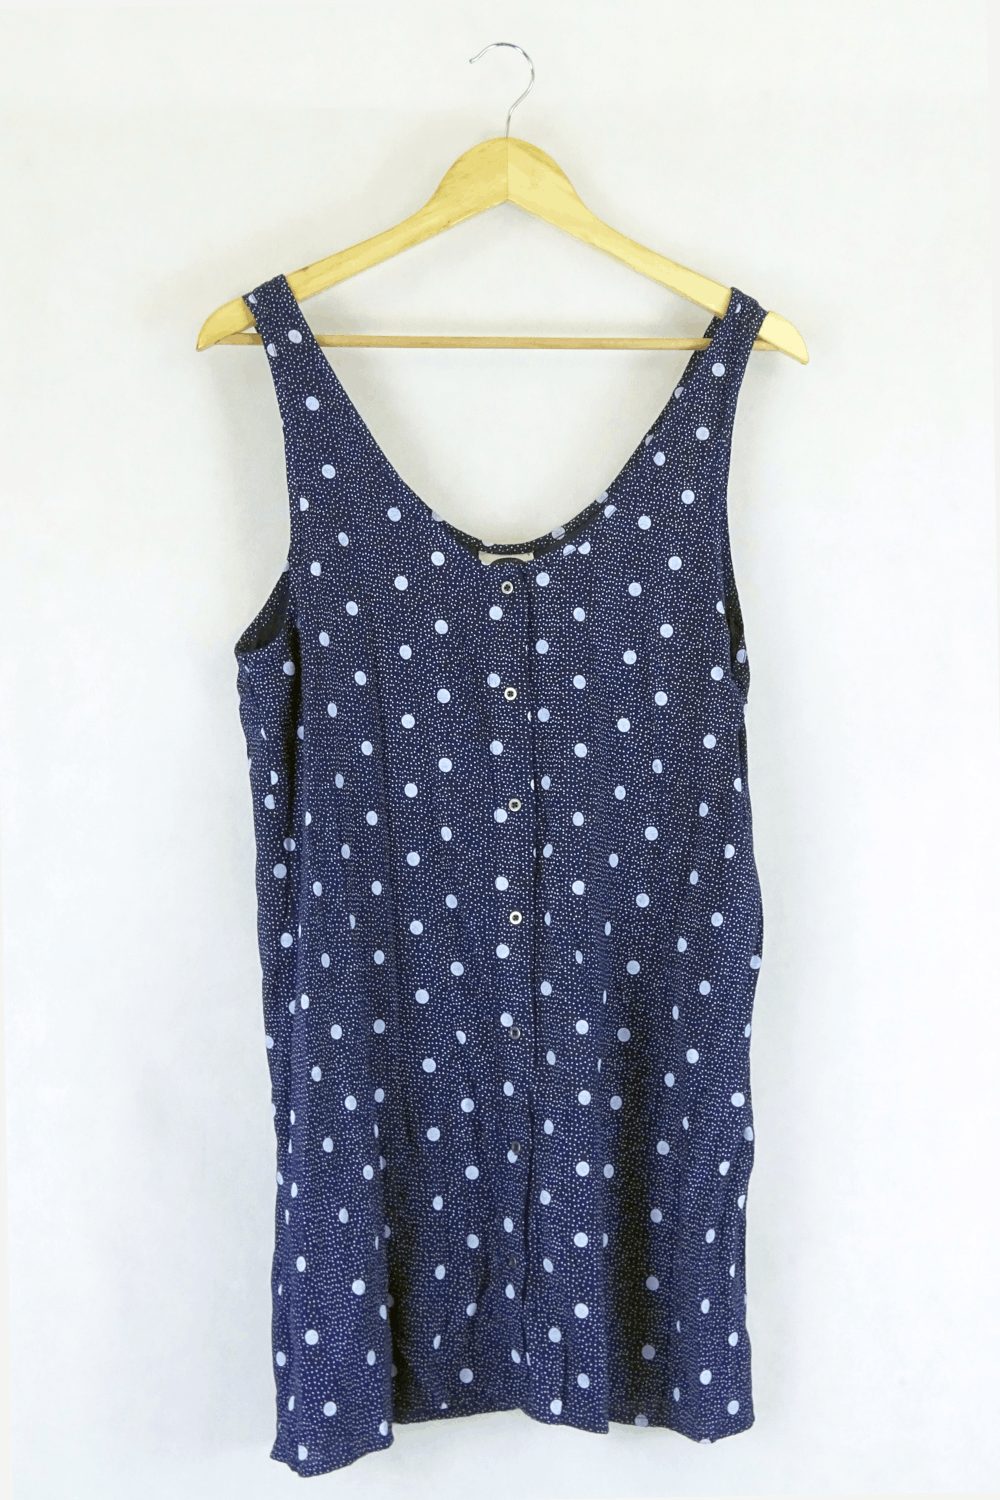 All About Eve Polka Dot White And Blue Top 10